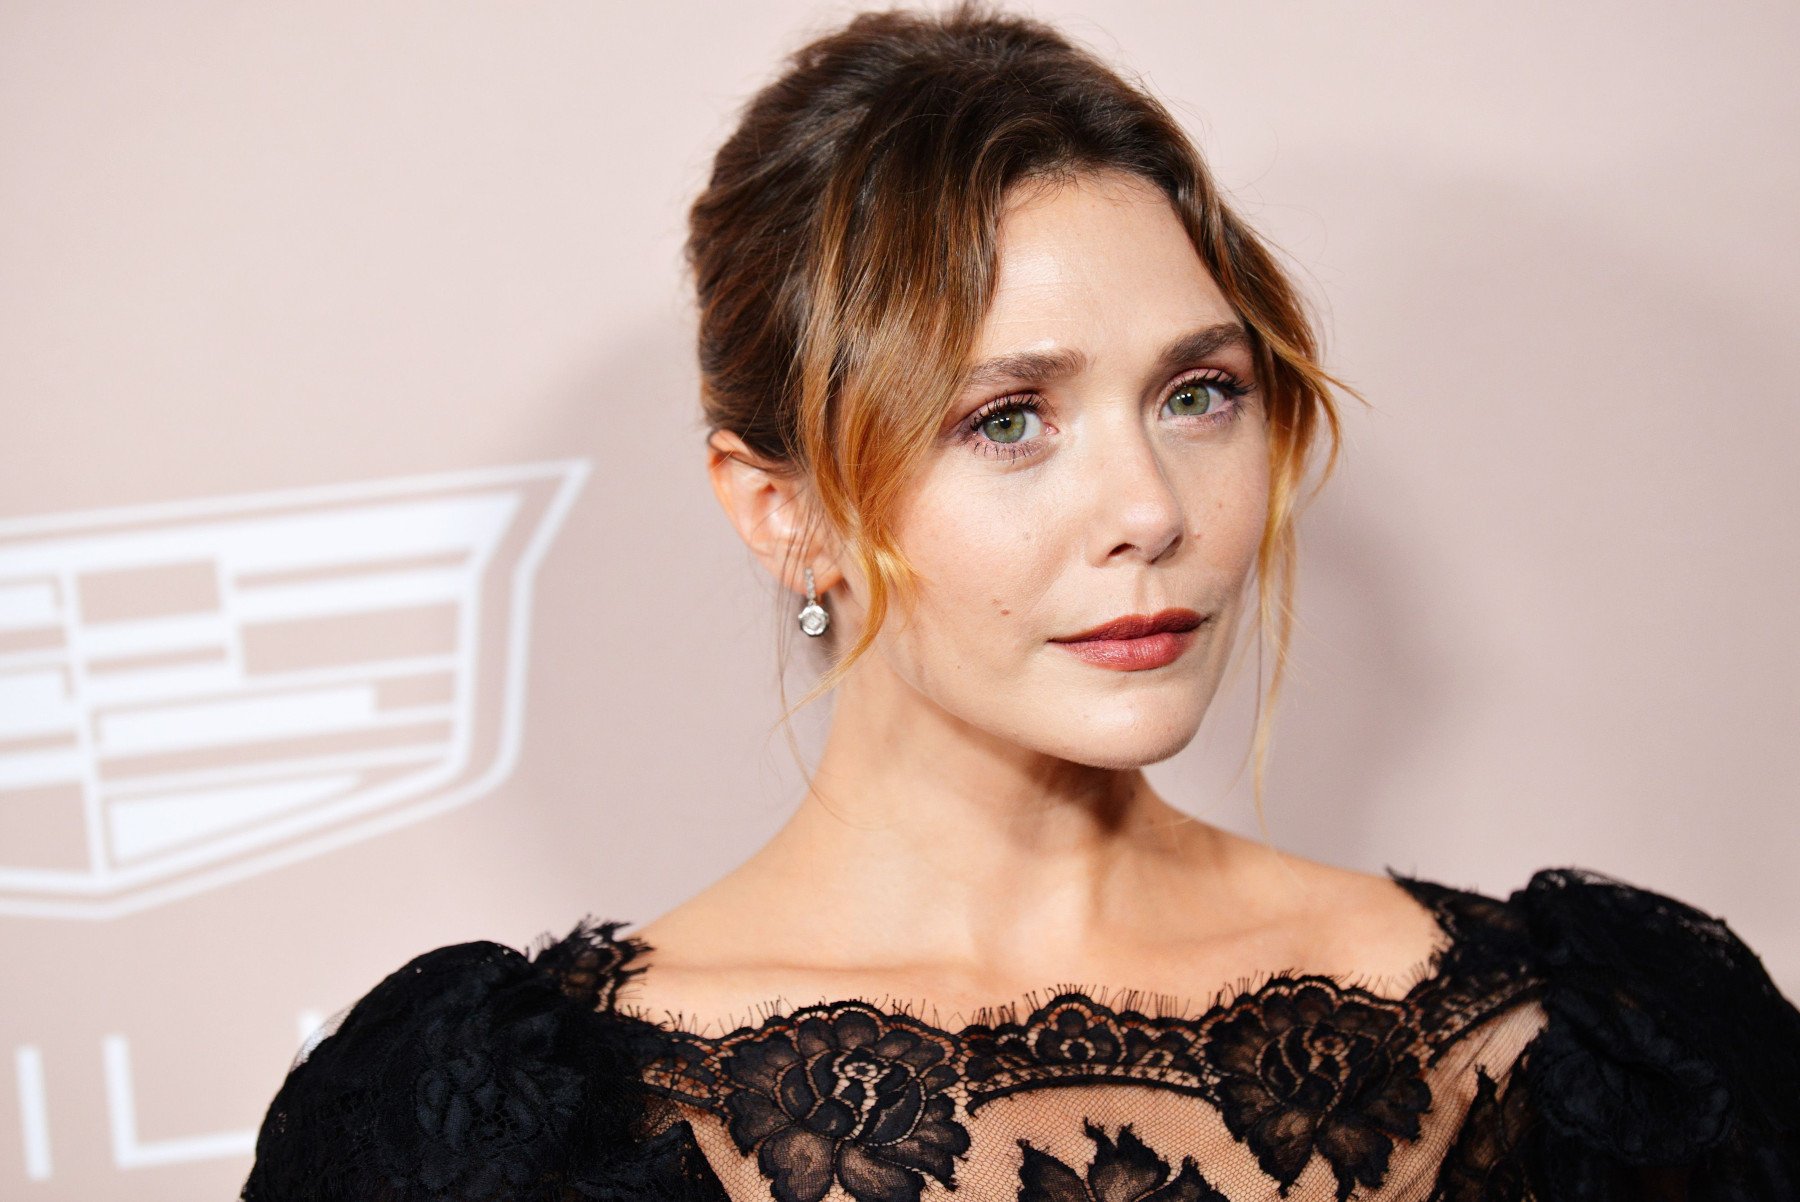 Elizabeth Olsen, who recently addressed rumors that she was cast in 'House of the Dragon.' She's wearing a black dress with lace on the top, and her hair is pulled back.